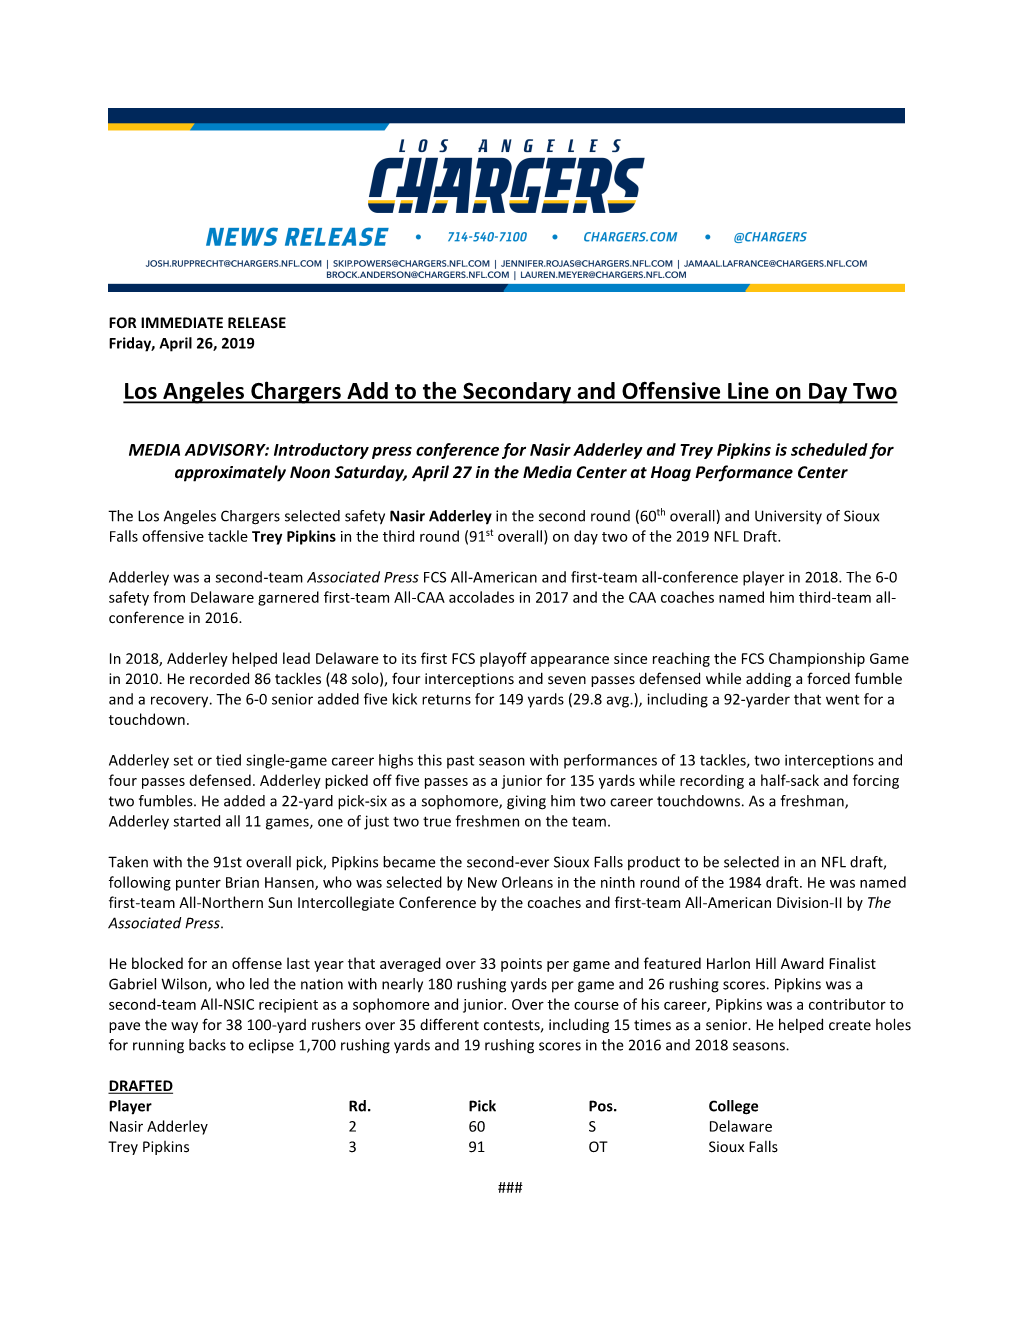 Los Angeles Chargers Add to the Secondary and Offensive Line on Day Two